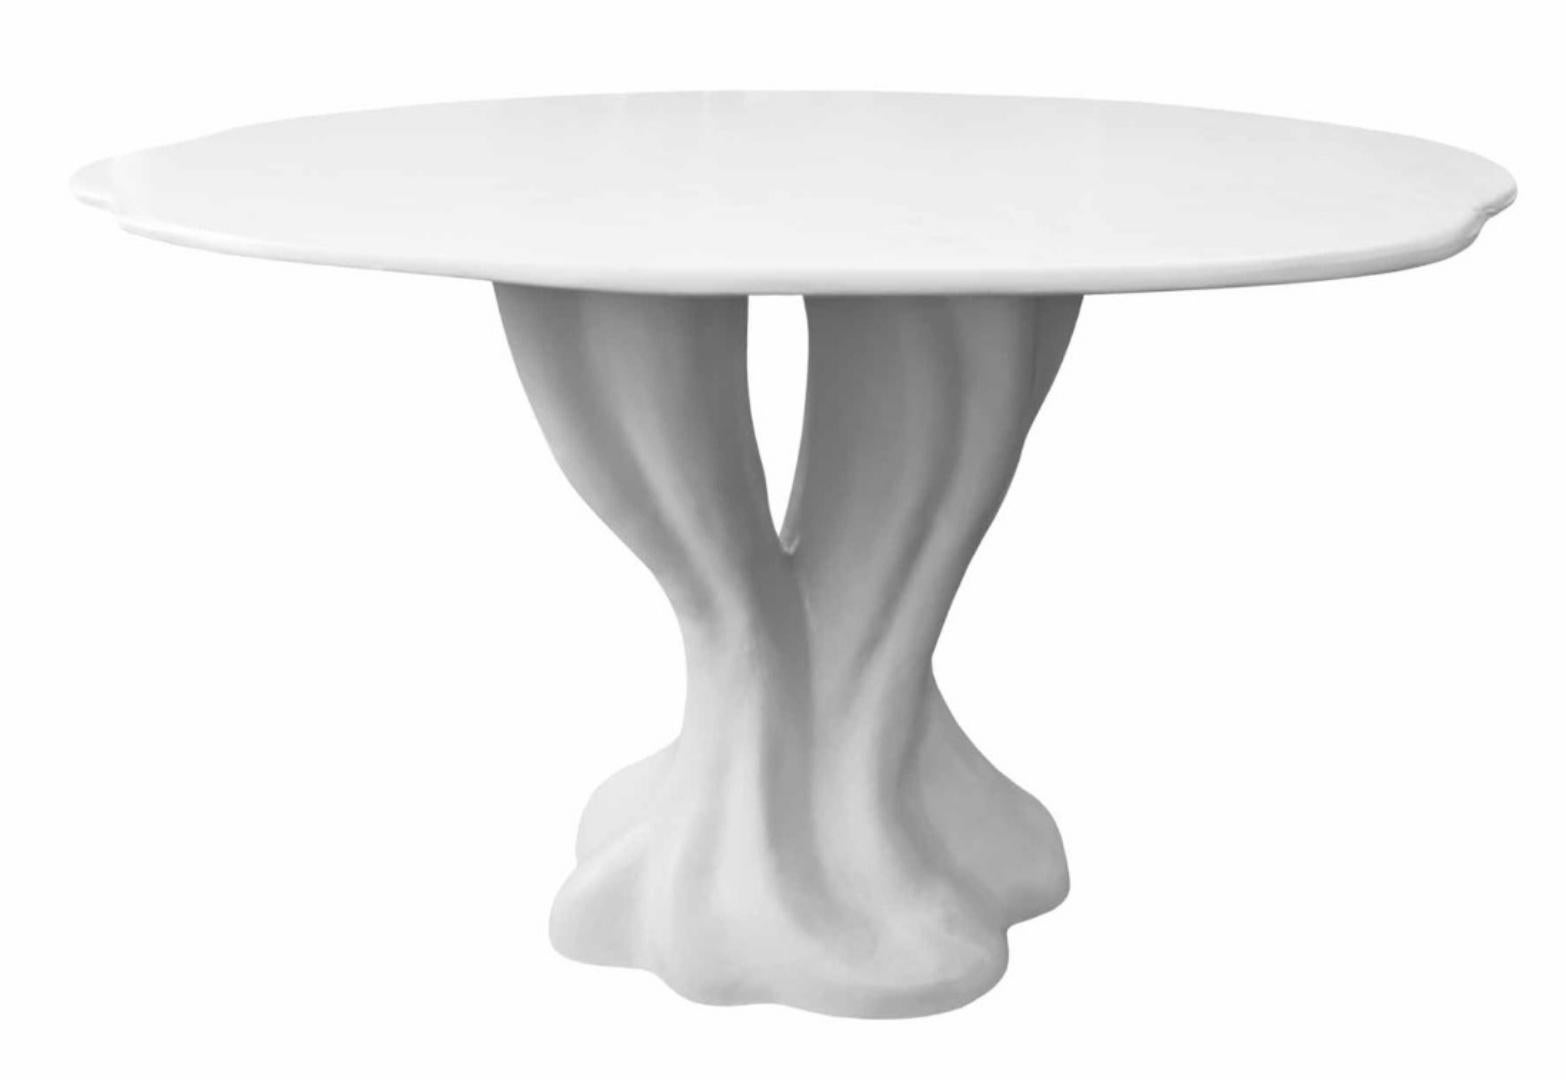 Portuguese New Design Dining Table in Fiberglass, Lacquered in Matte White 4/6 Persons For Sale